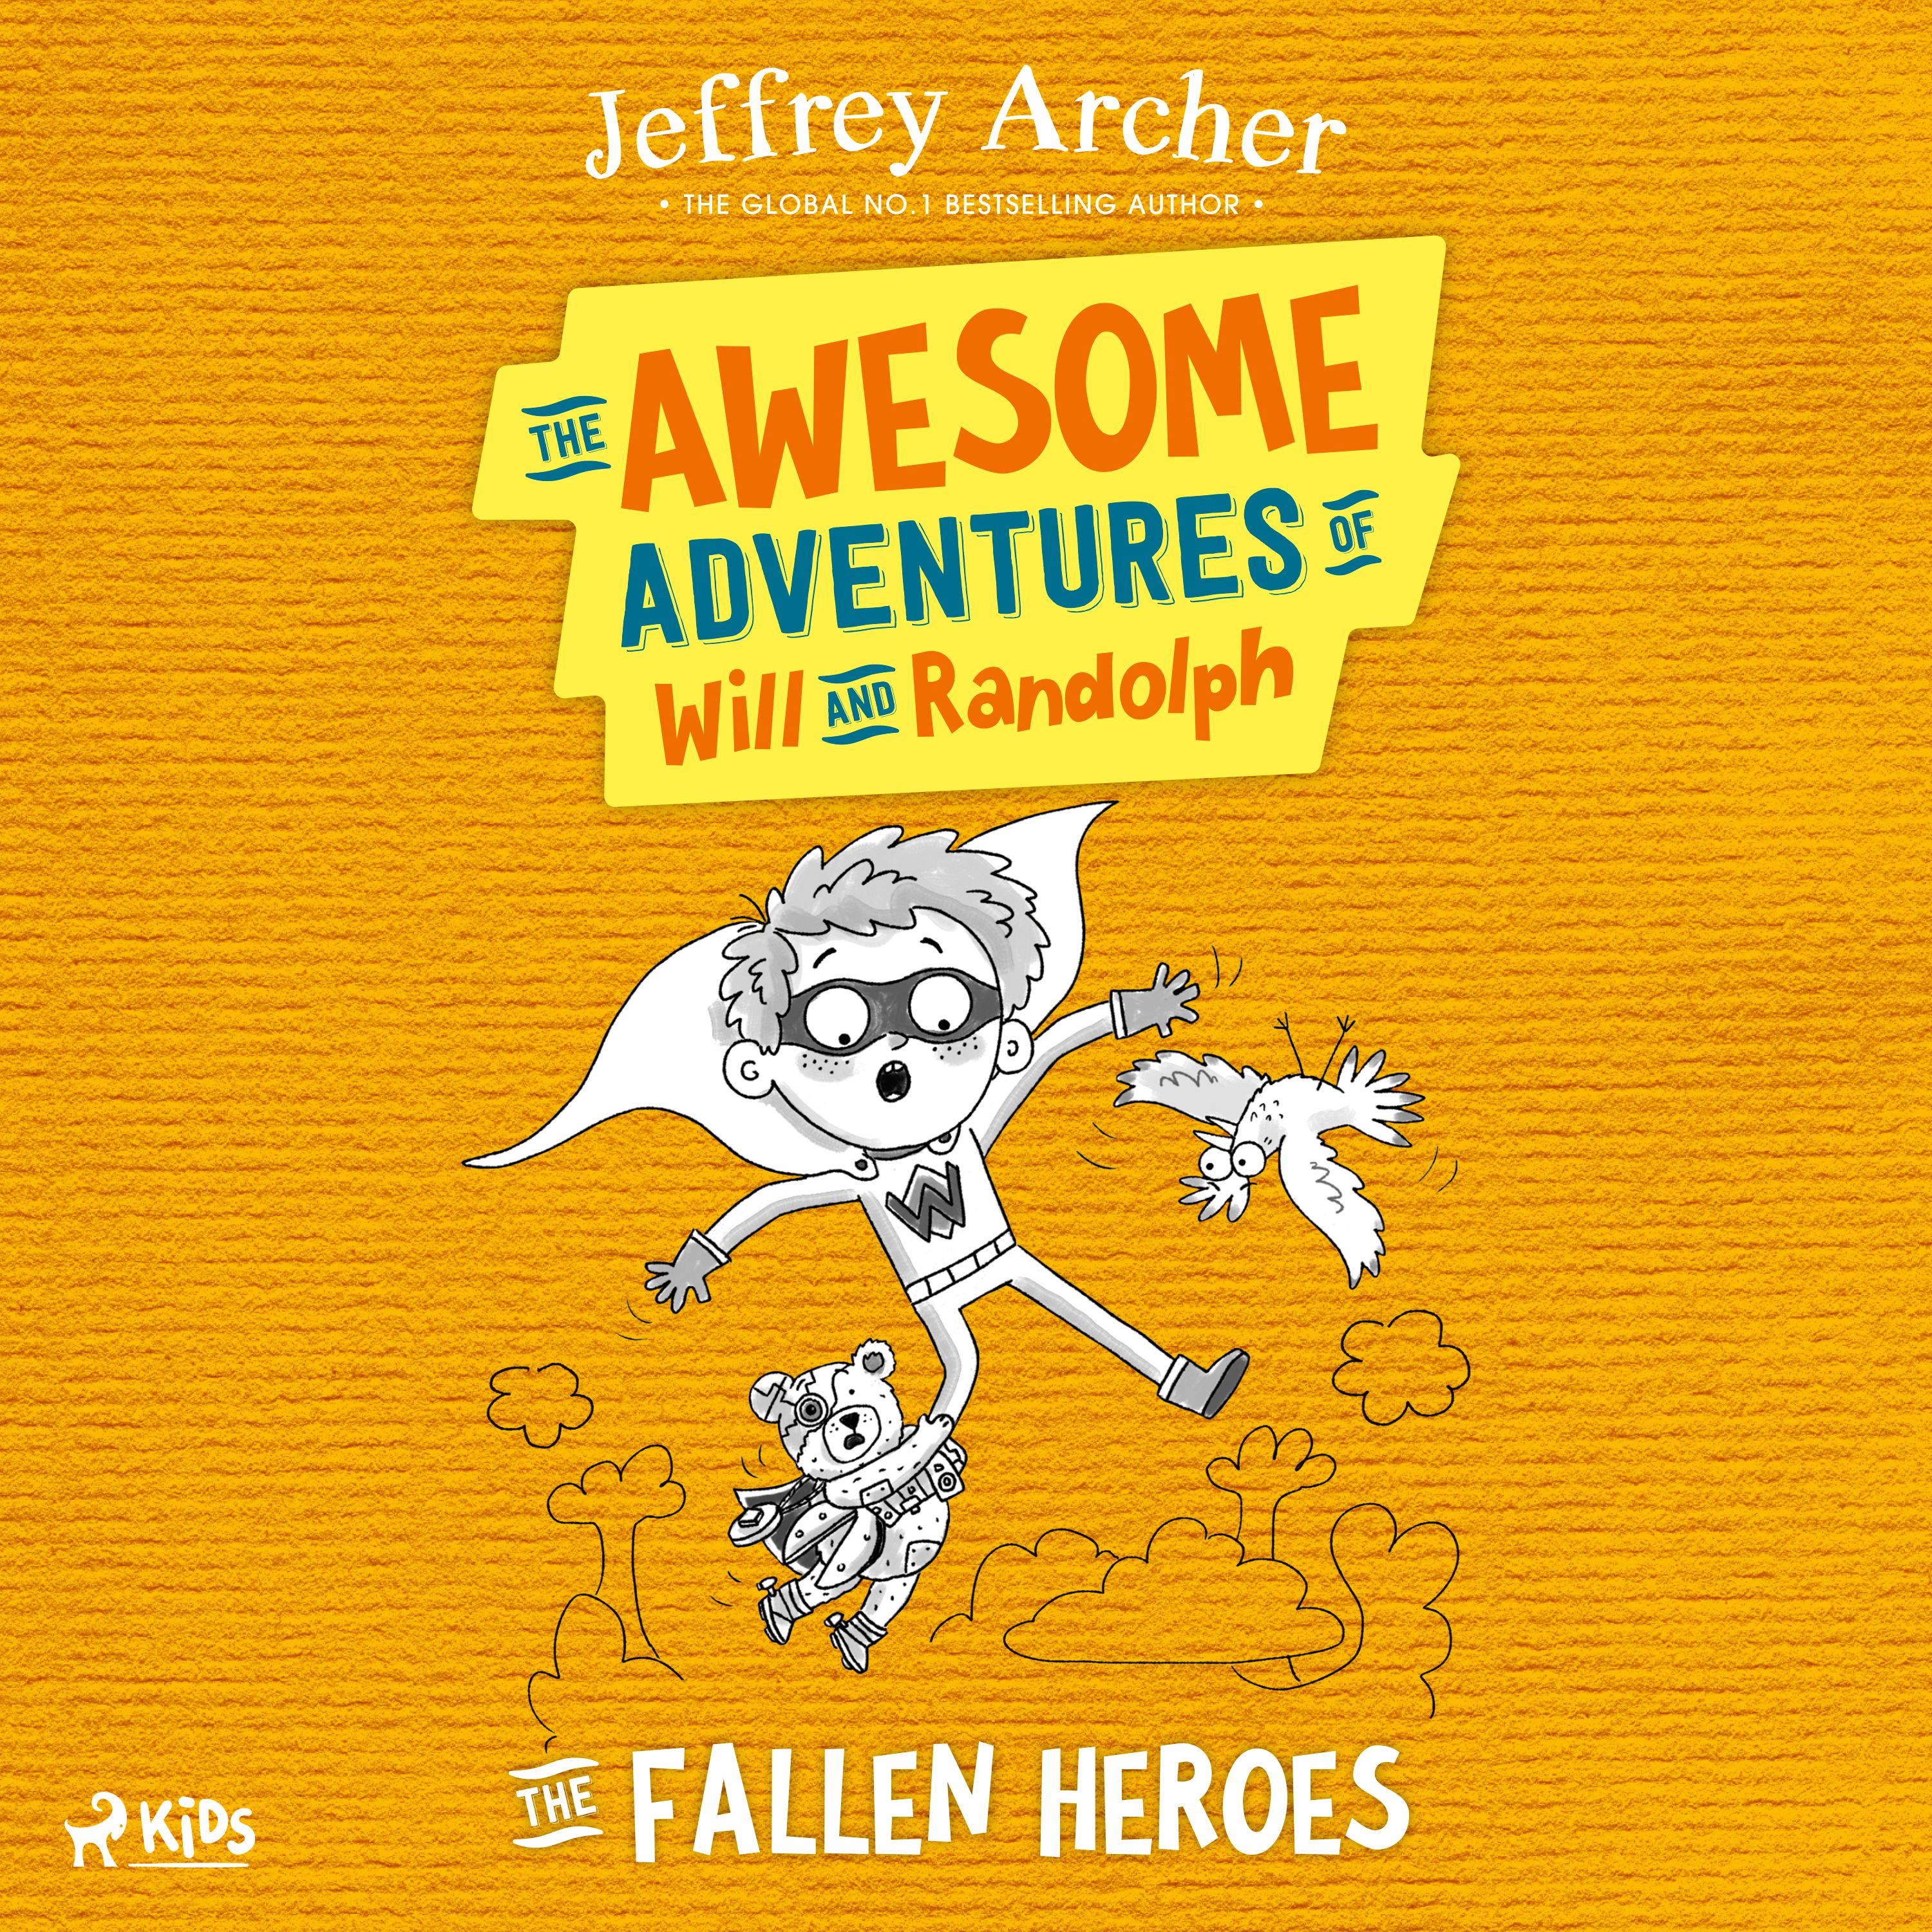 The Awesome Adventures of Will and Randolph: The Fallen Heroes, audiobook by Jeffrey Archer